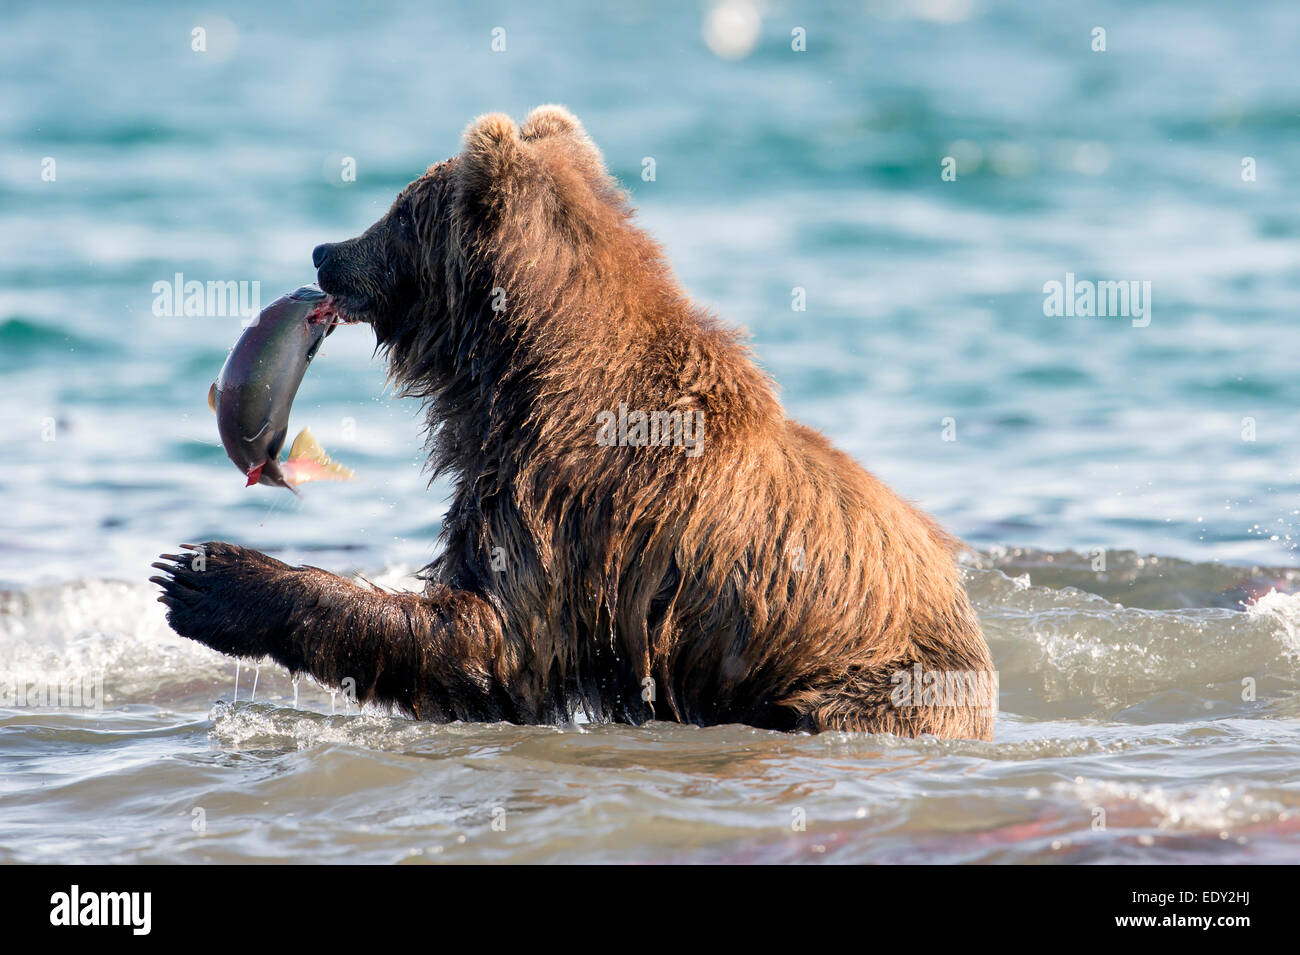 A brown bear catches a salmon during the salmon run Stock Photo